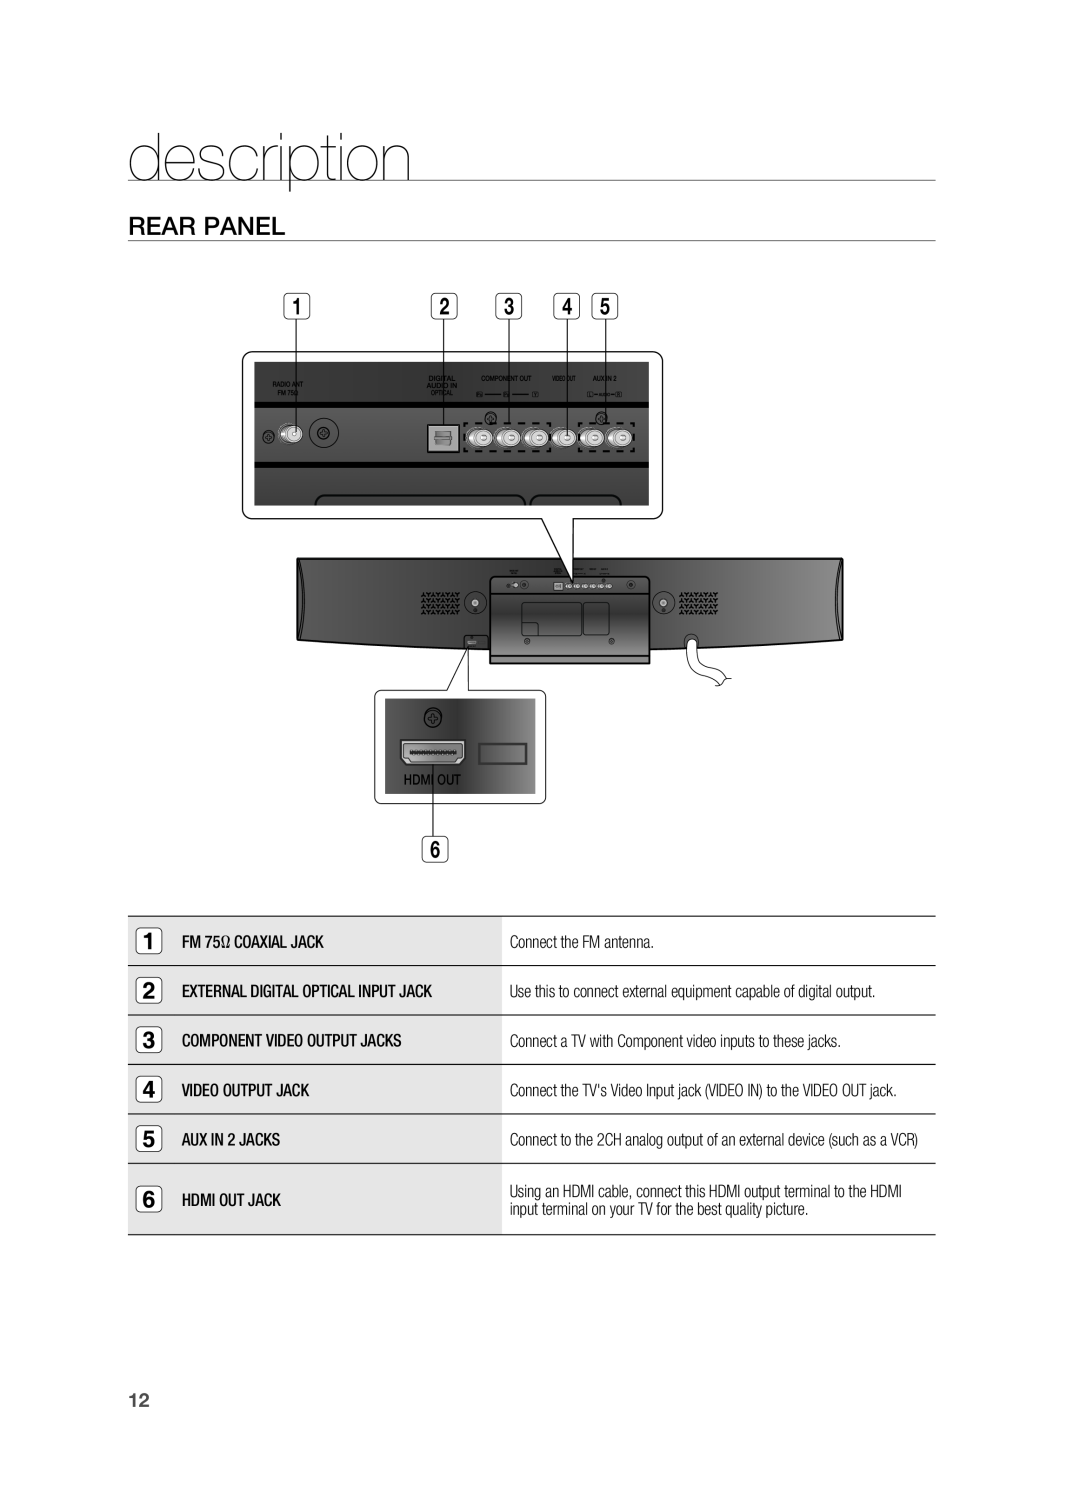 Sony HT-X810 Rear Panel, description, Hdmi Out, Use this to connect external equipment capable of digital output 